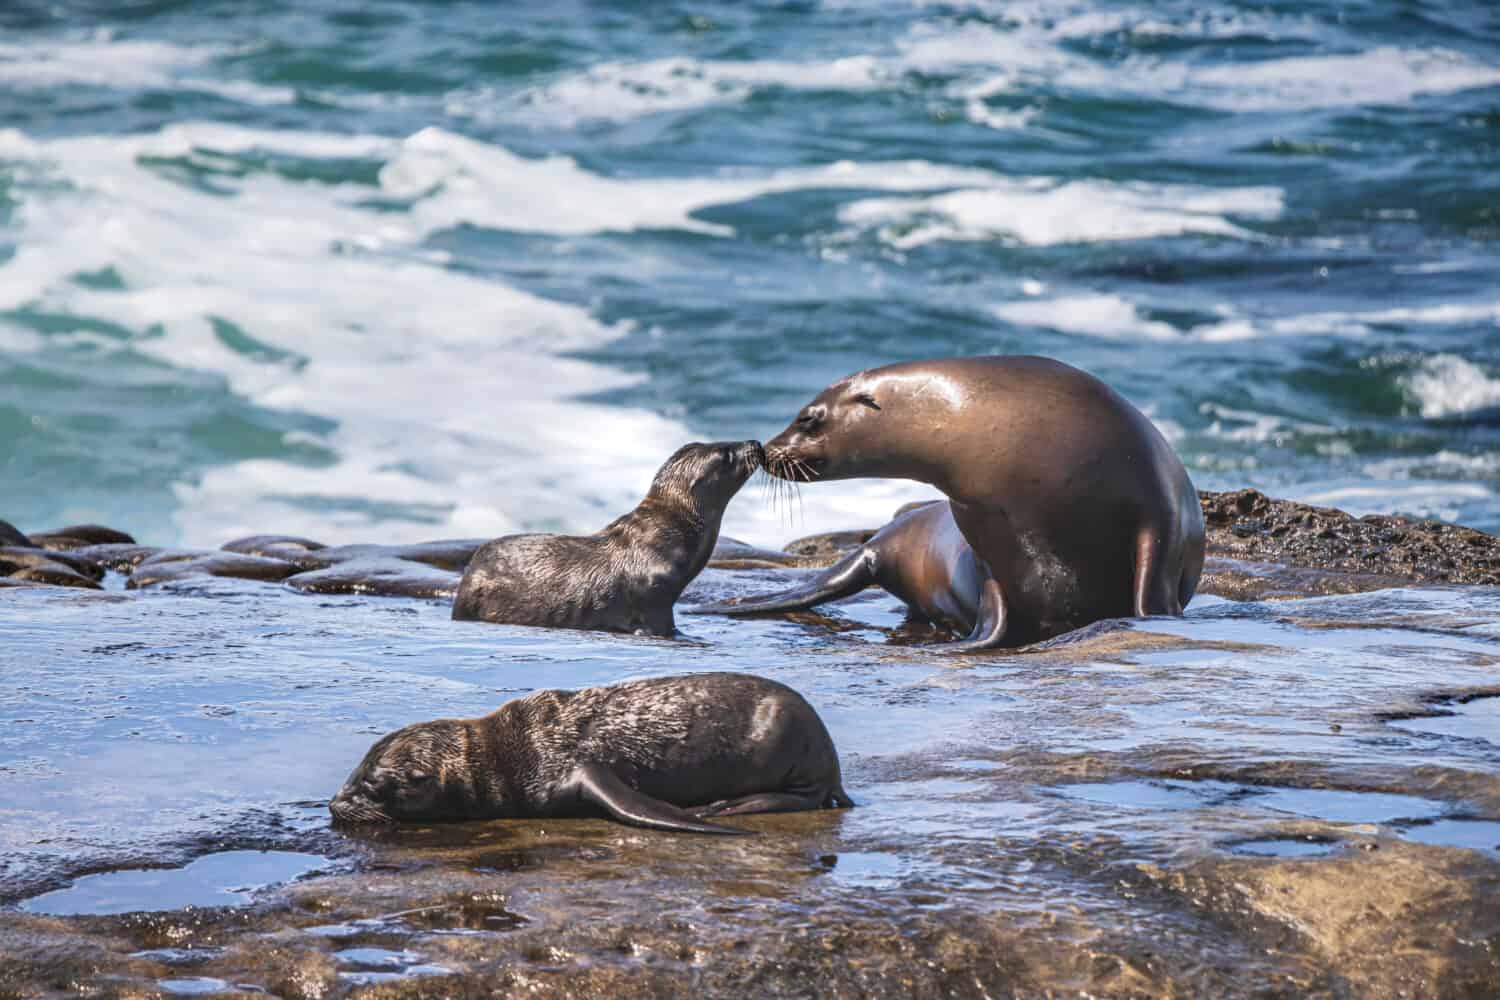 Sea Lions sitting  on rocks  at the beach. La Jolla Cove in San Diego, California. Mom and baby animal kissing  images.